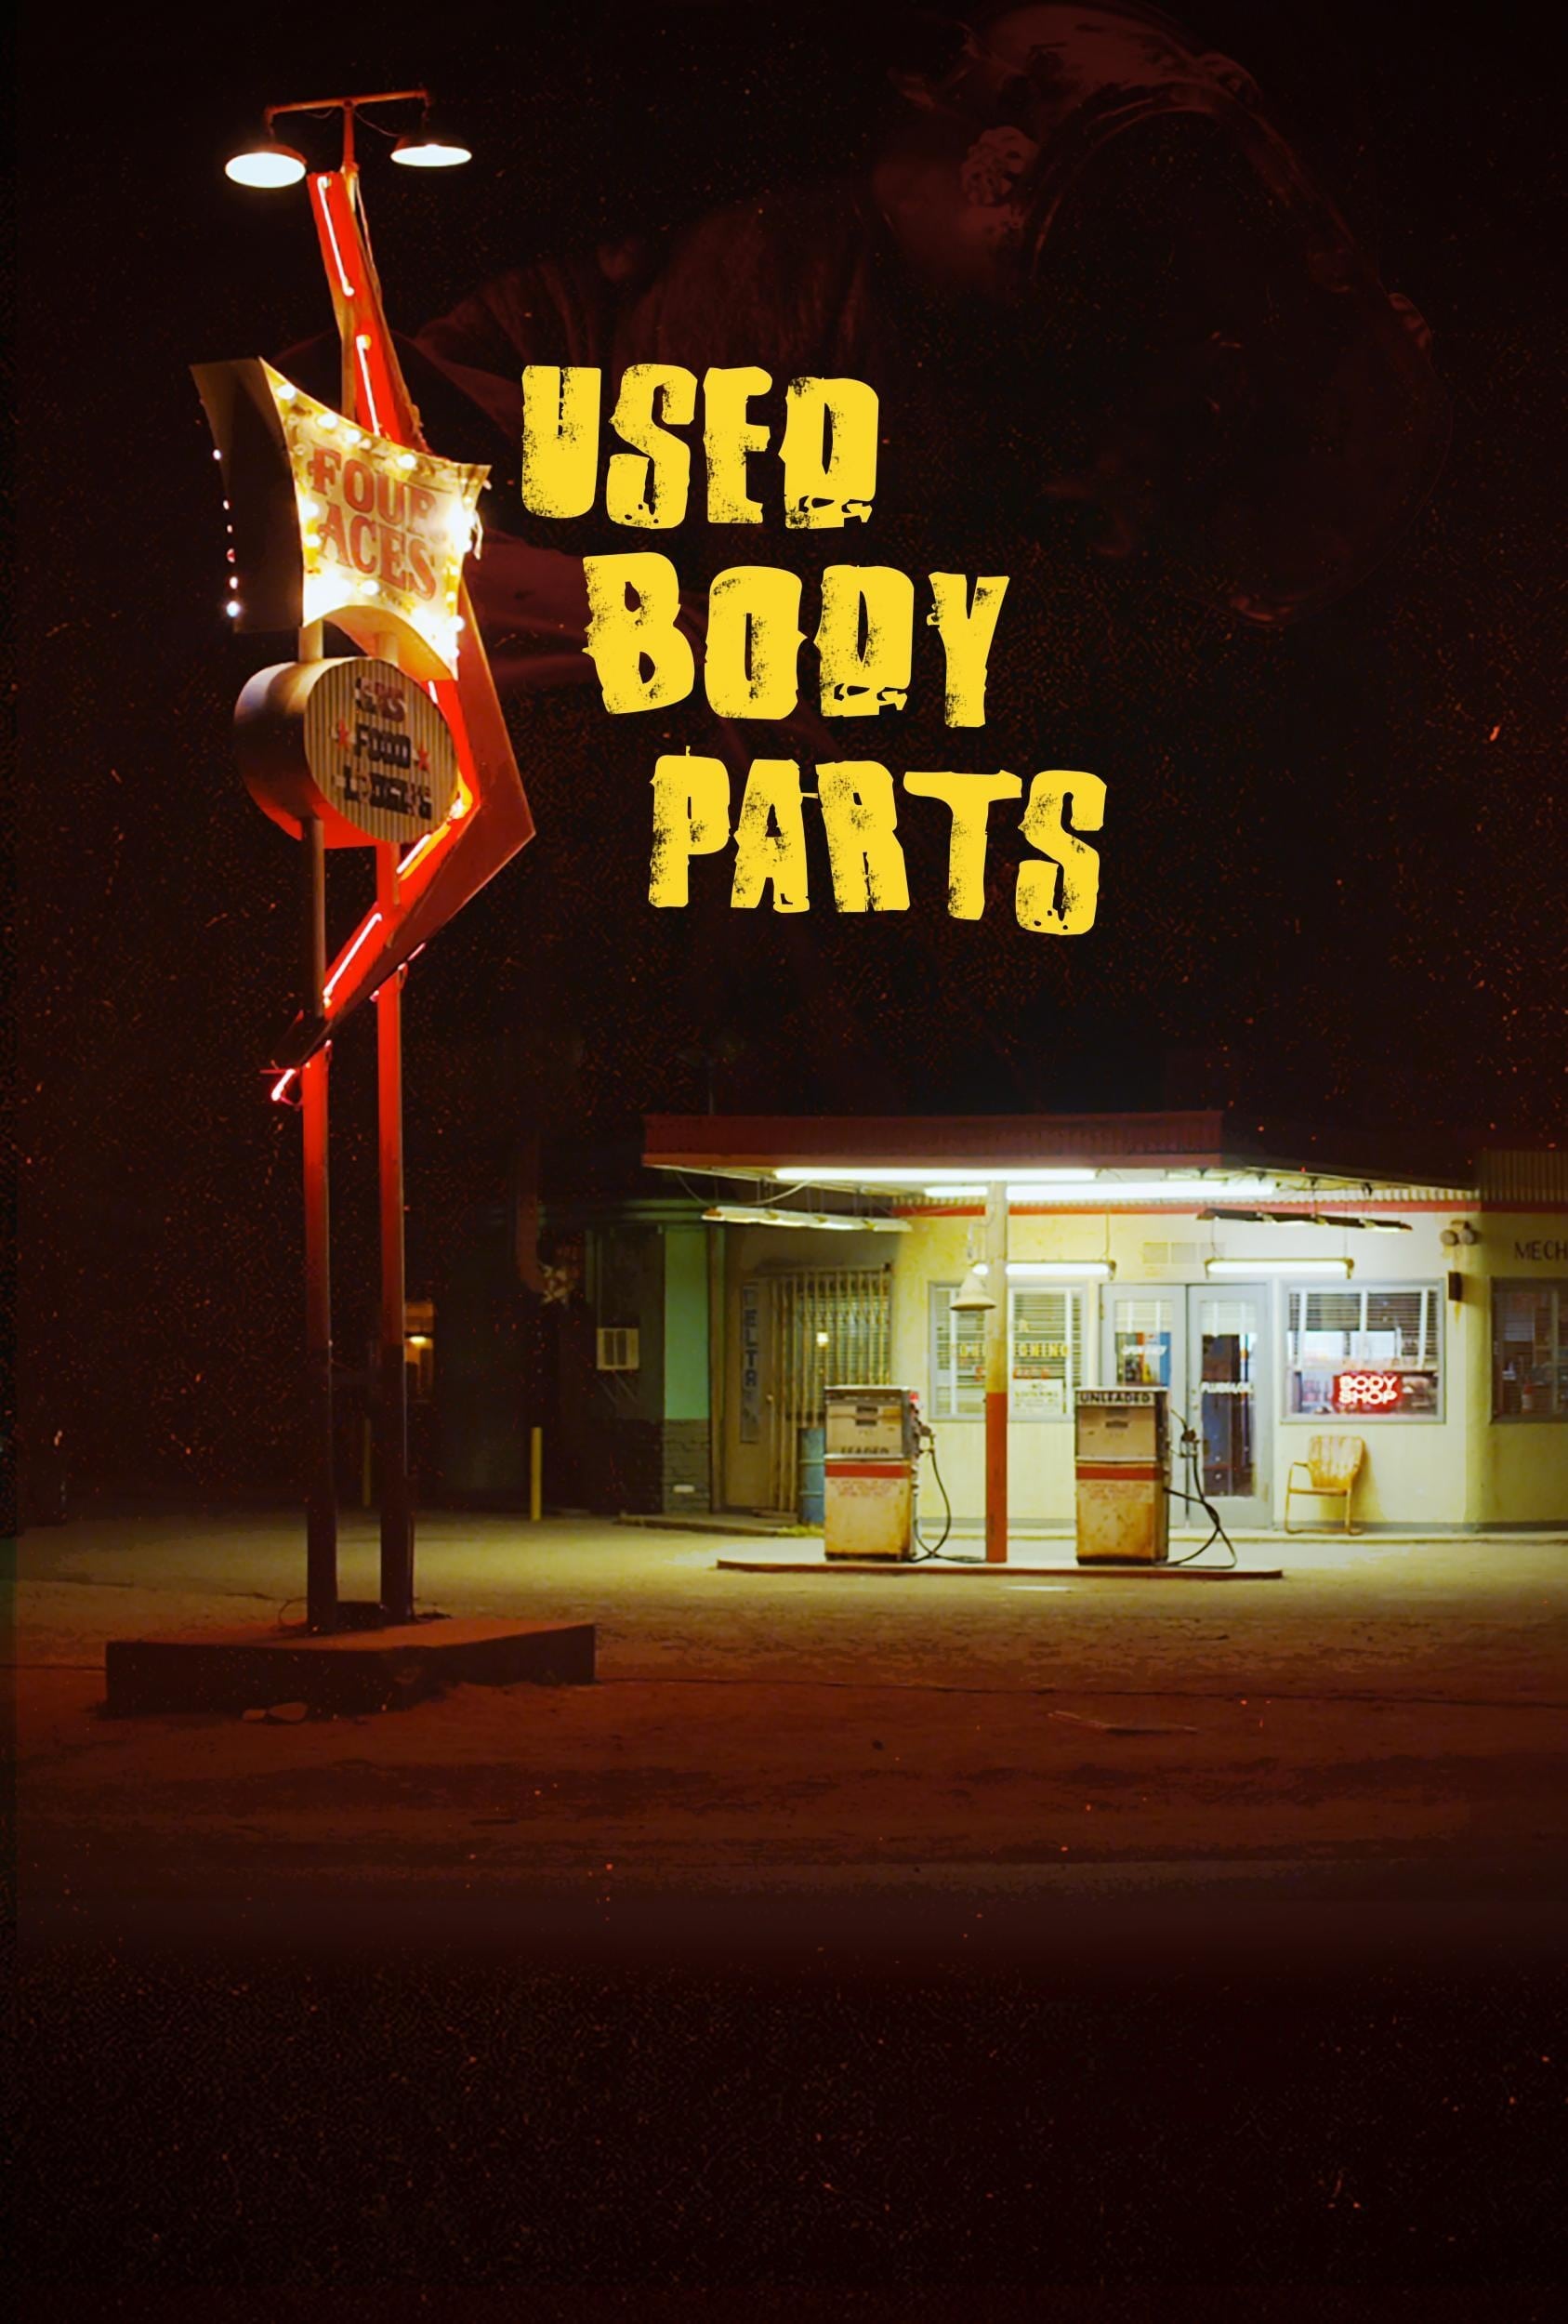 Used Body Parts